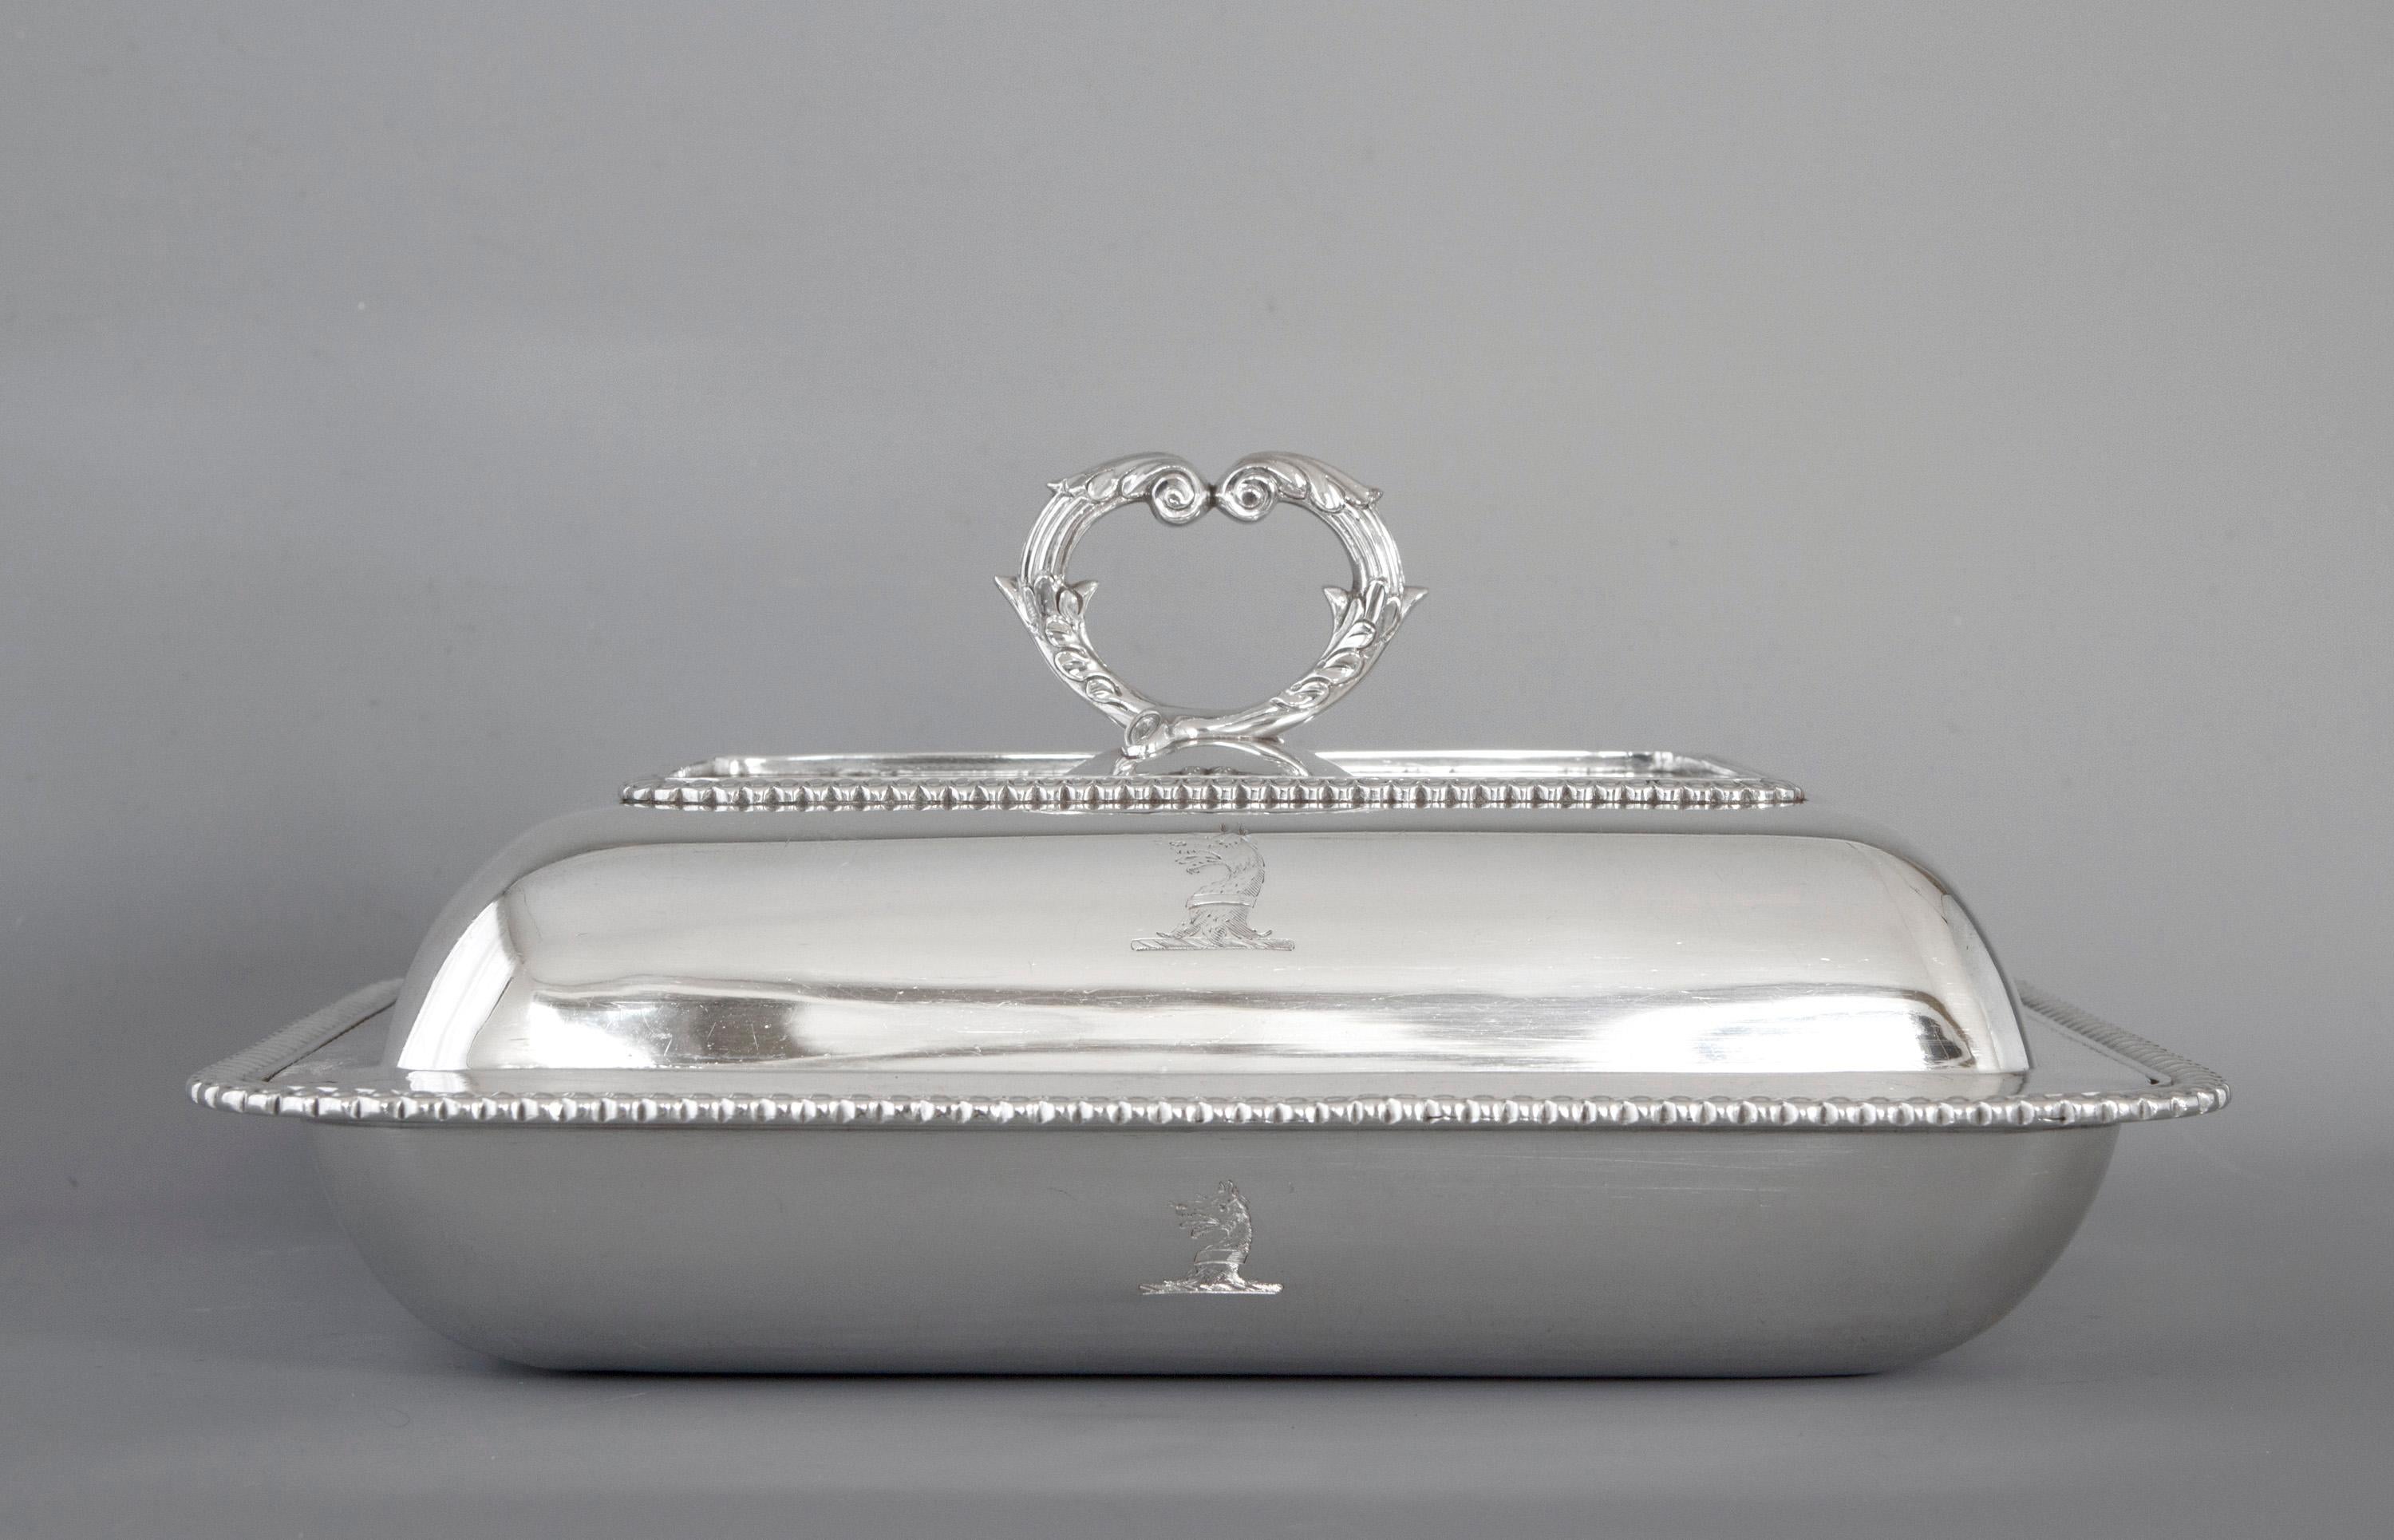 An excellent quality George III solid silver entree dish of shaped rectangular cushion form.
Decorated with gadrooned borders to base and cover, both have an engraved crest see pictures. The removable cast silver handle with matching decoration.
